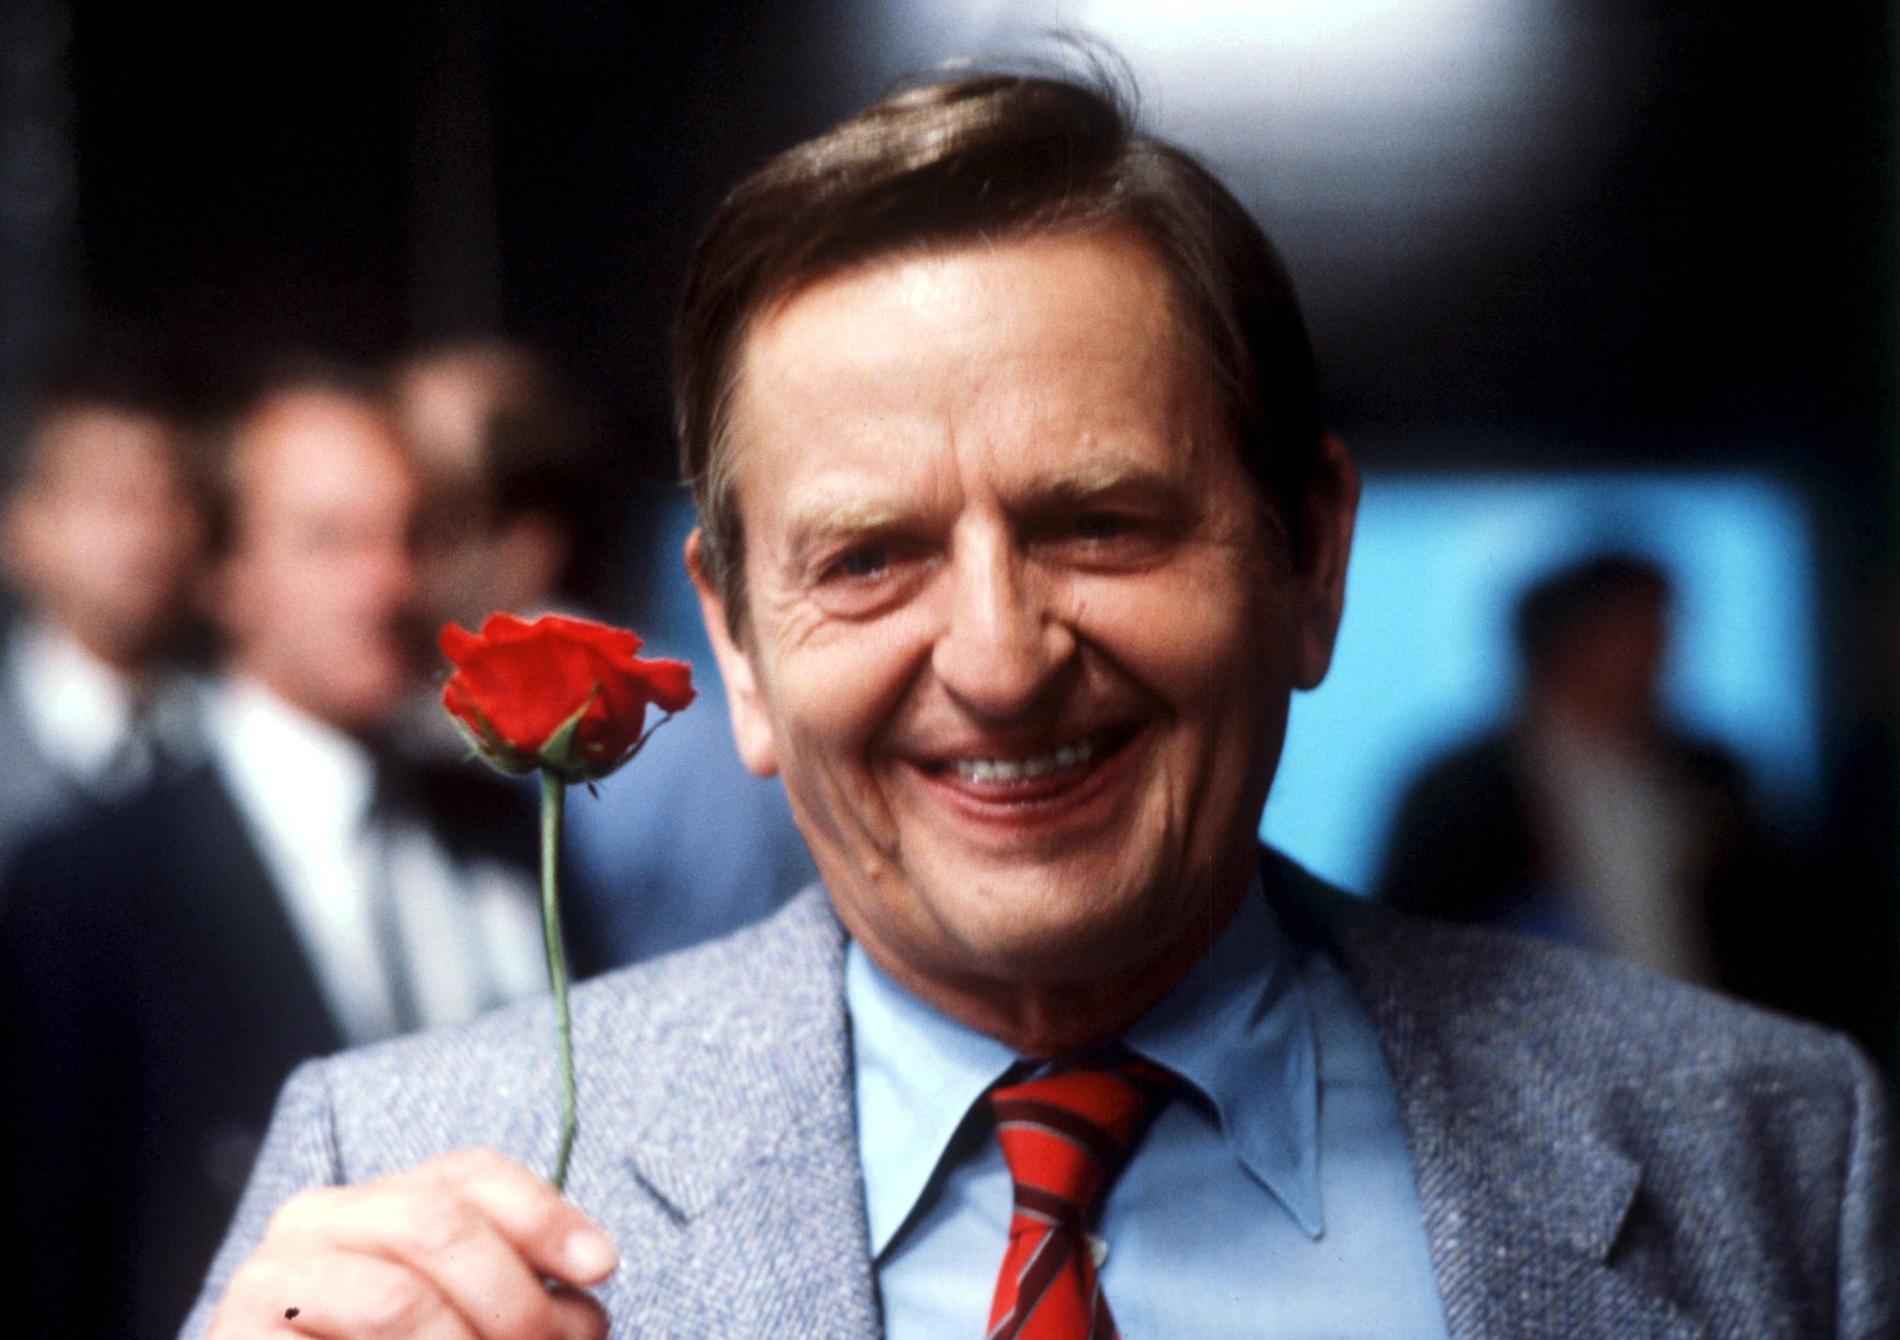 Olof Palme was Prime Minister of Sweden at the time of his death.